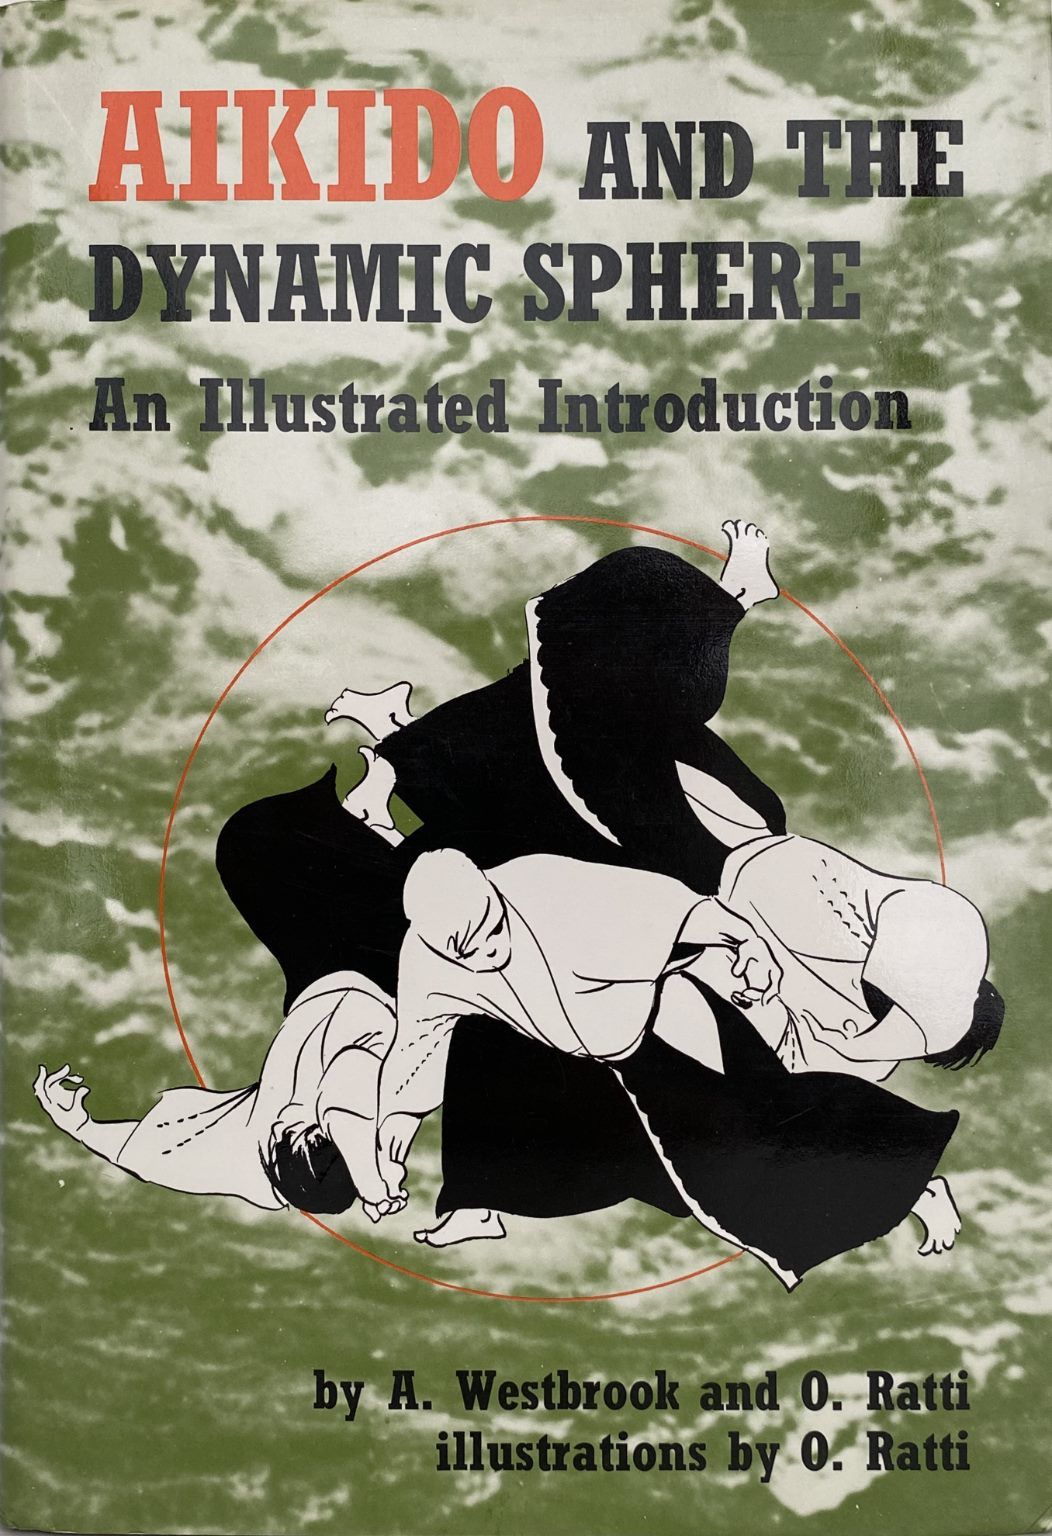 AIKIDO AND THE DYNAMIC SPHERE